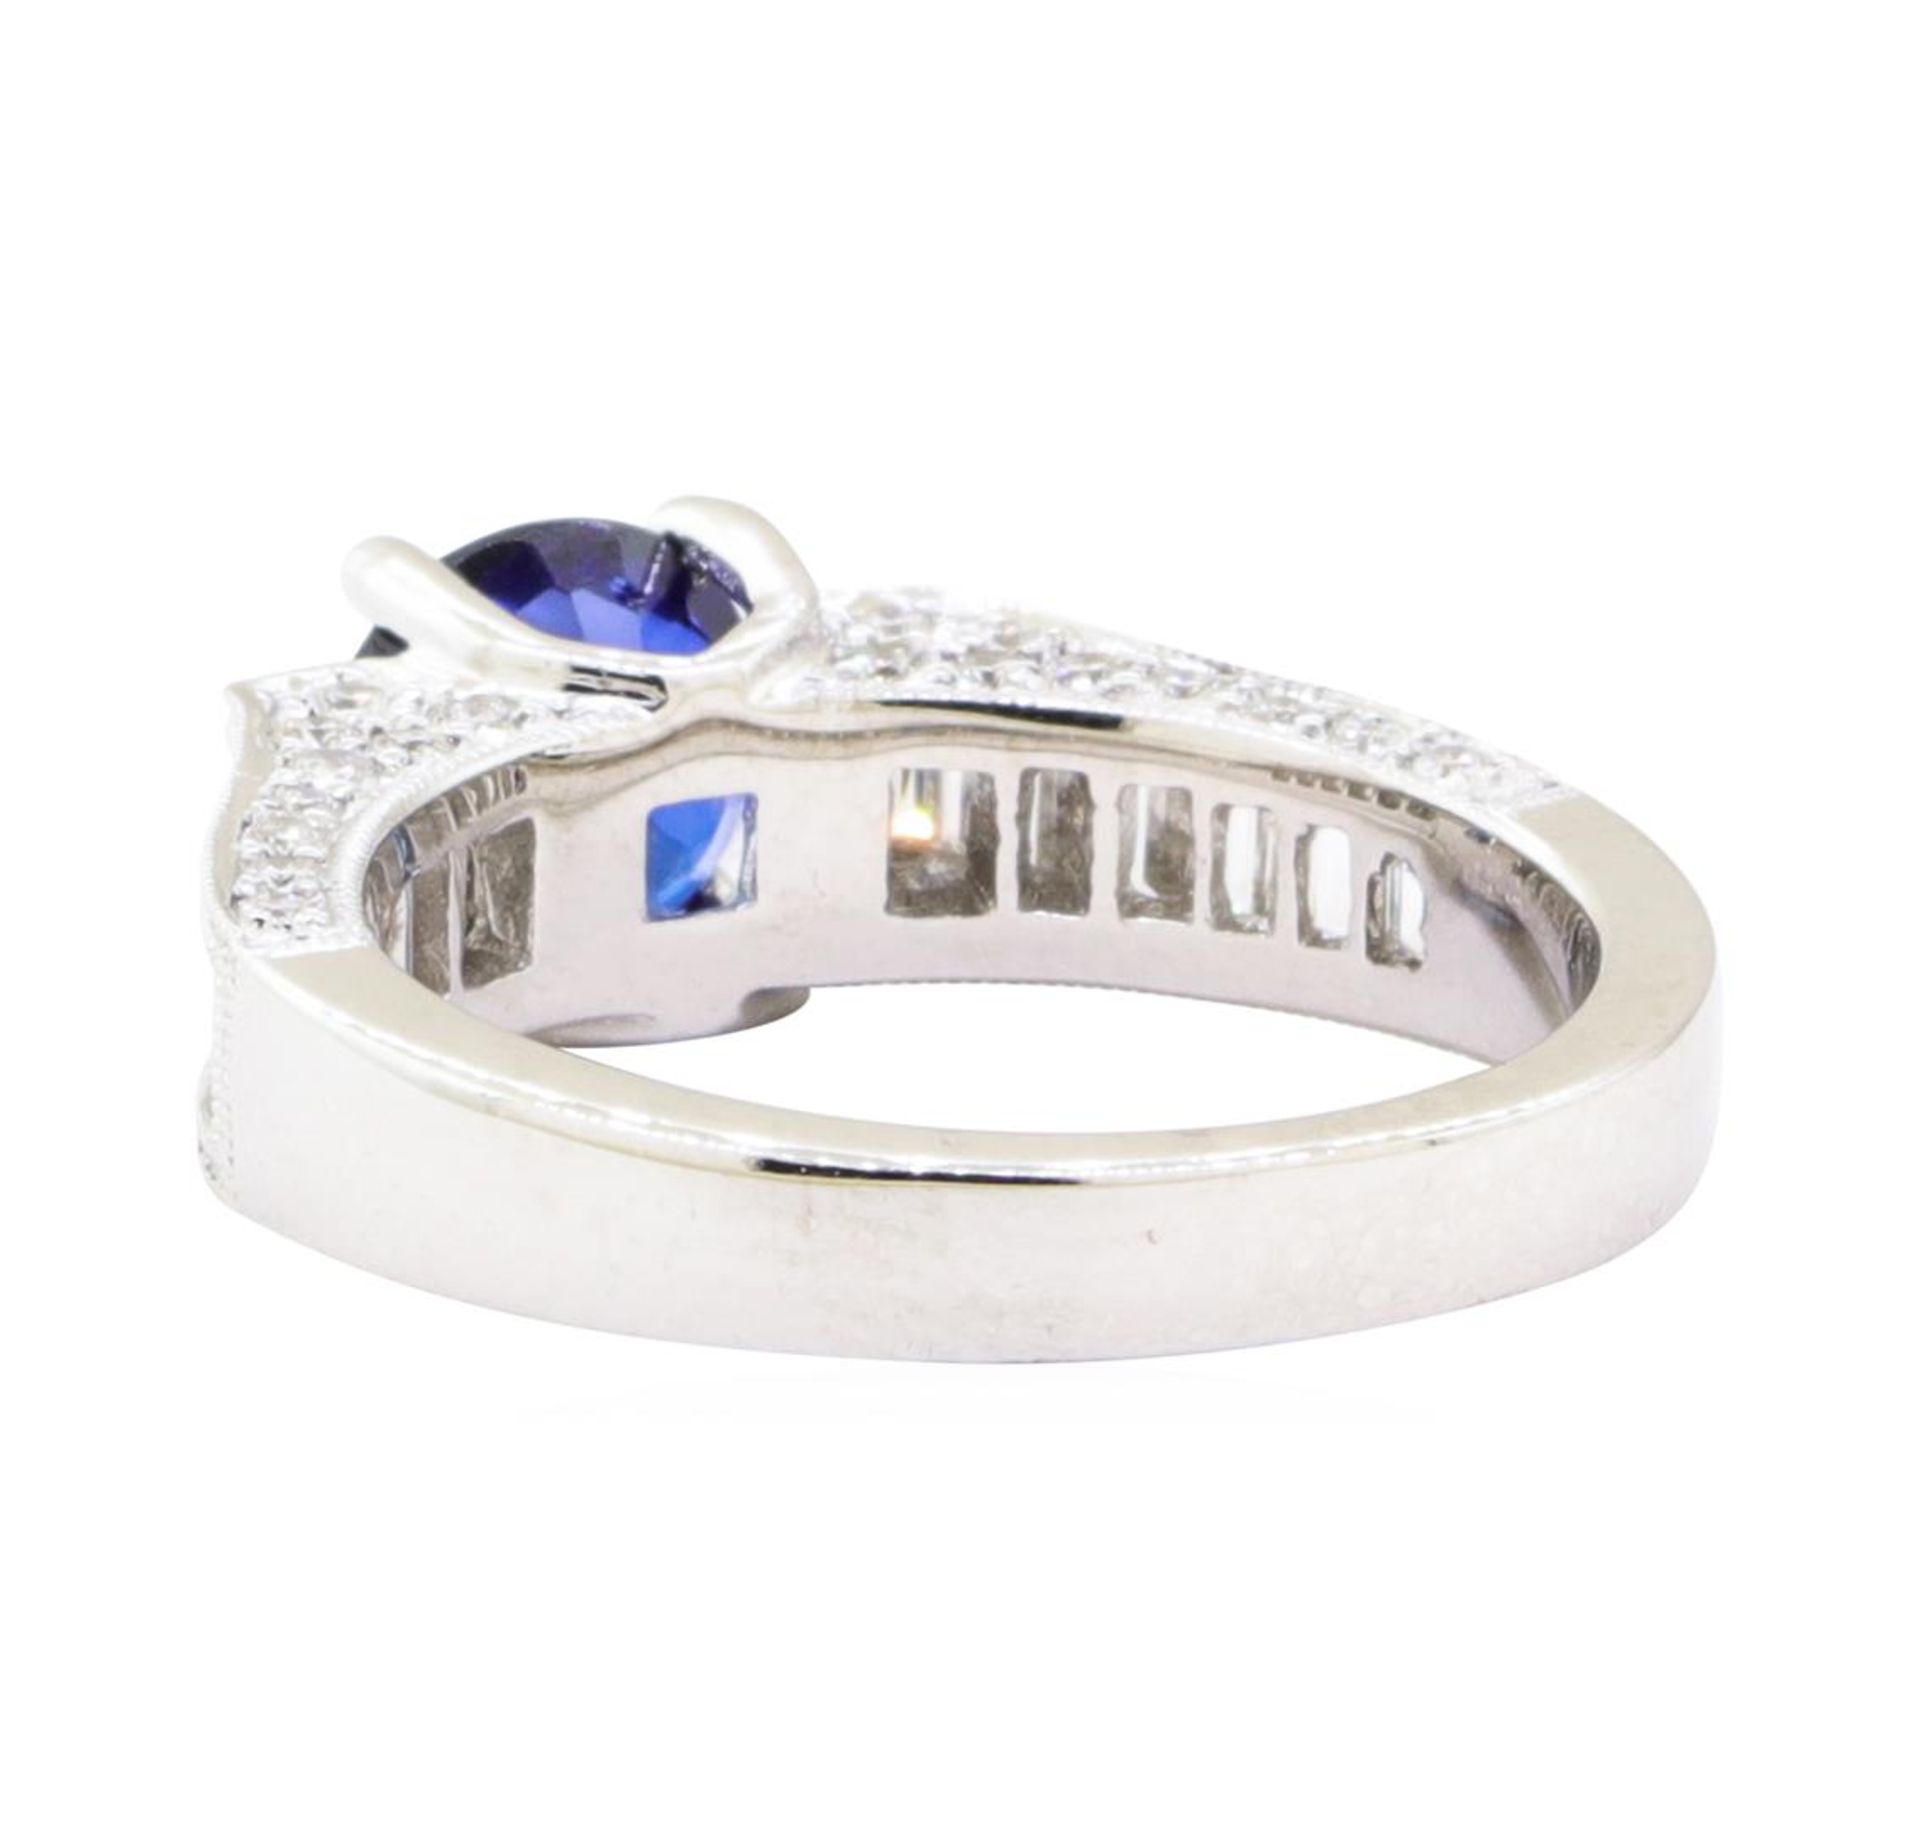 2.60 ctw Sapphire And Diamond Ring - 18KT White Gold - Image 3 of 5